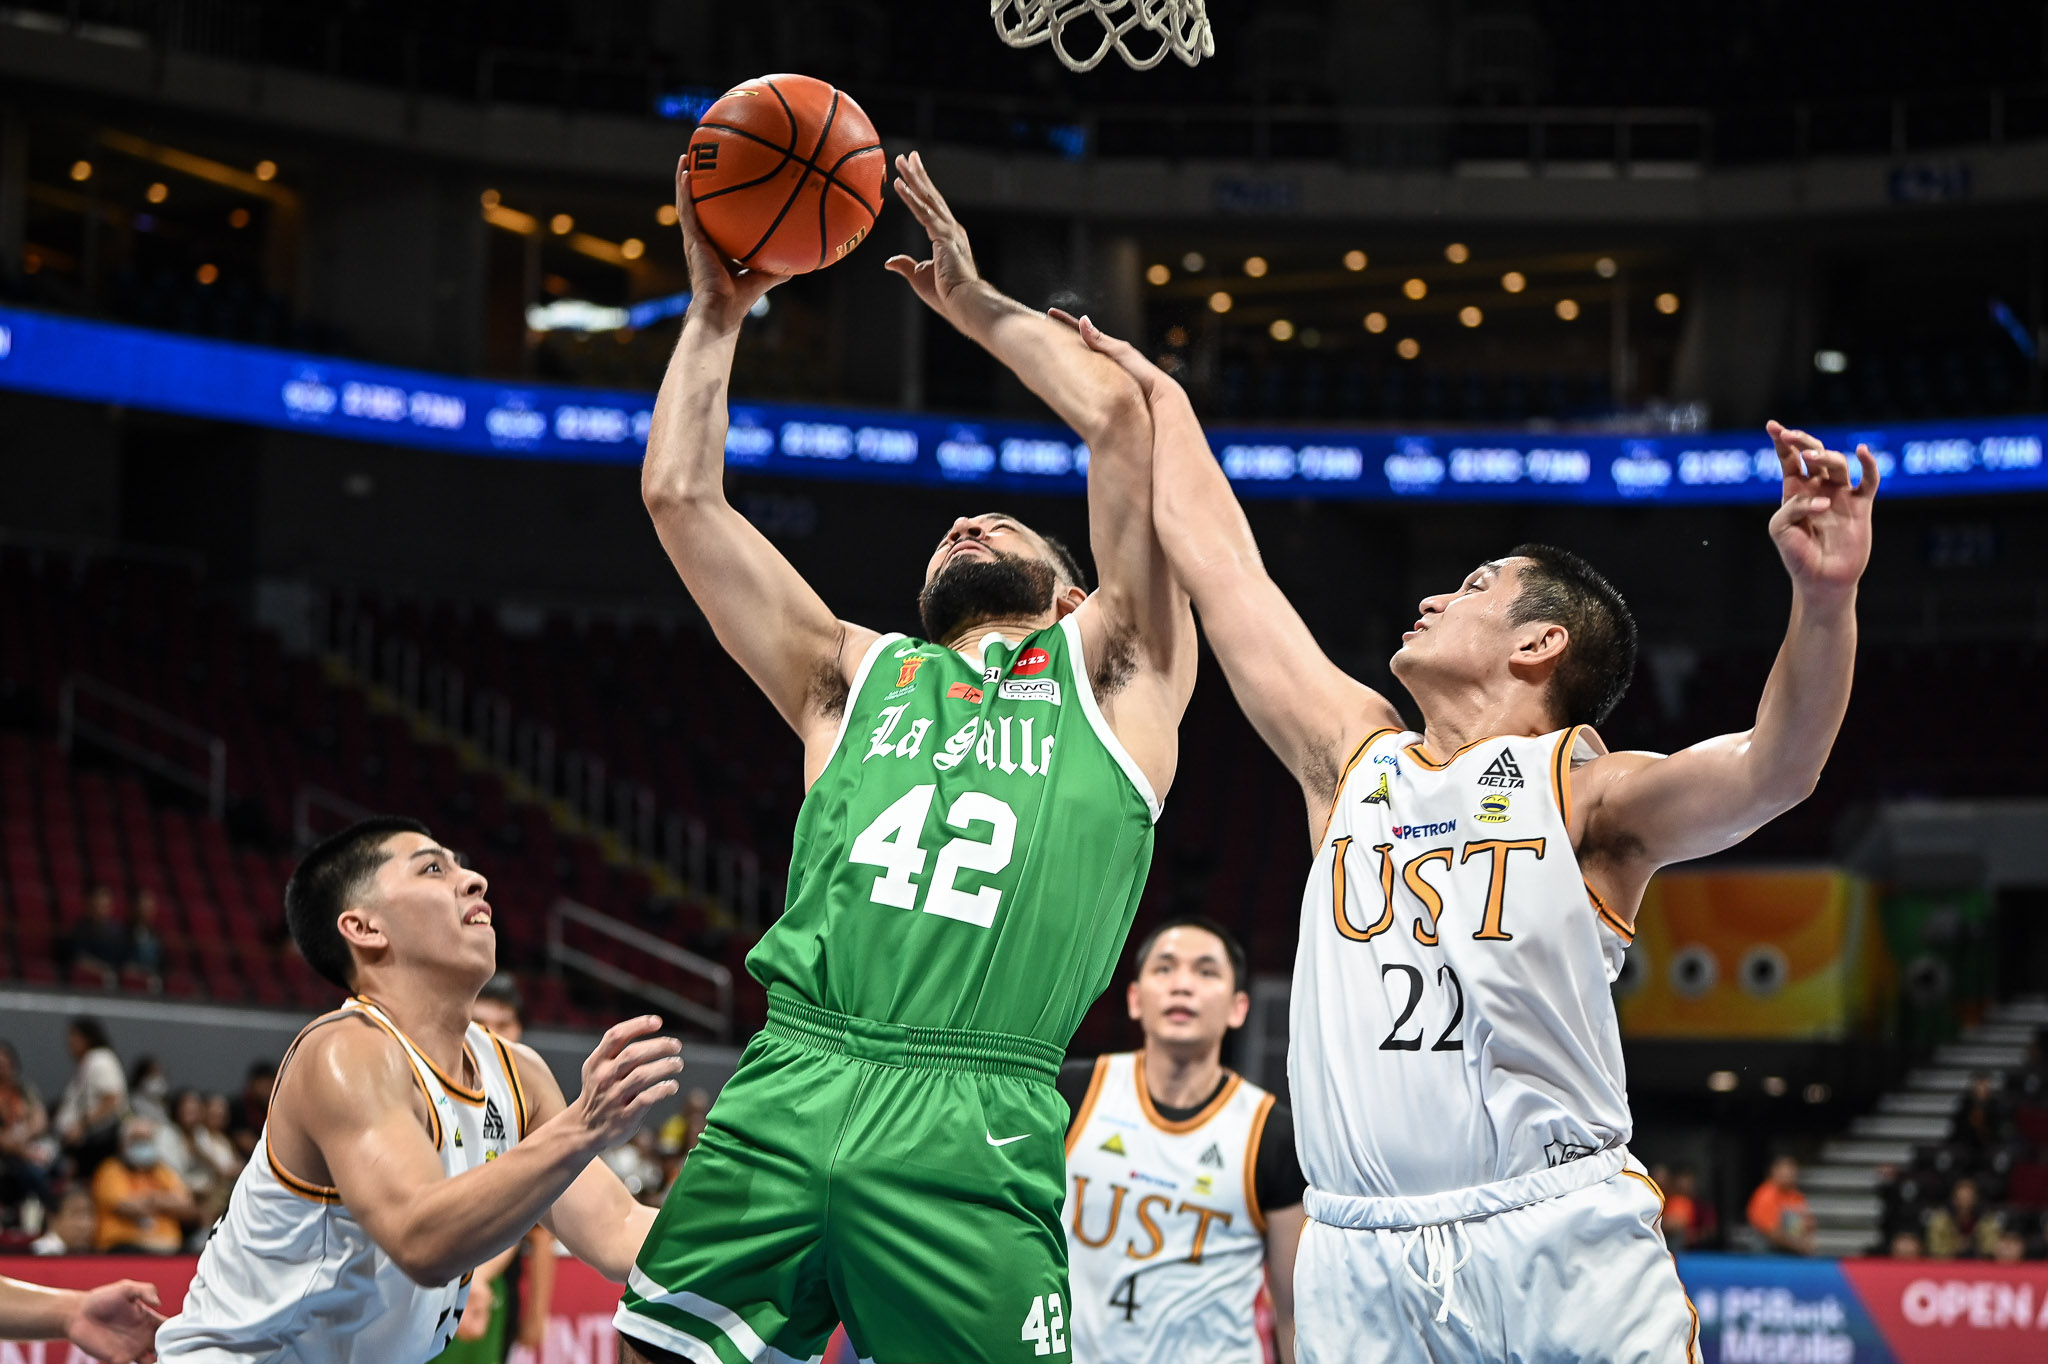 La Salle posts back-to-back wins, crushes UST by 31